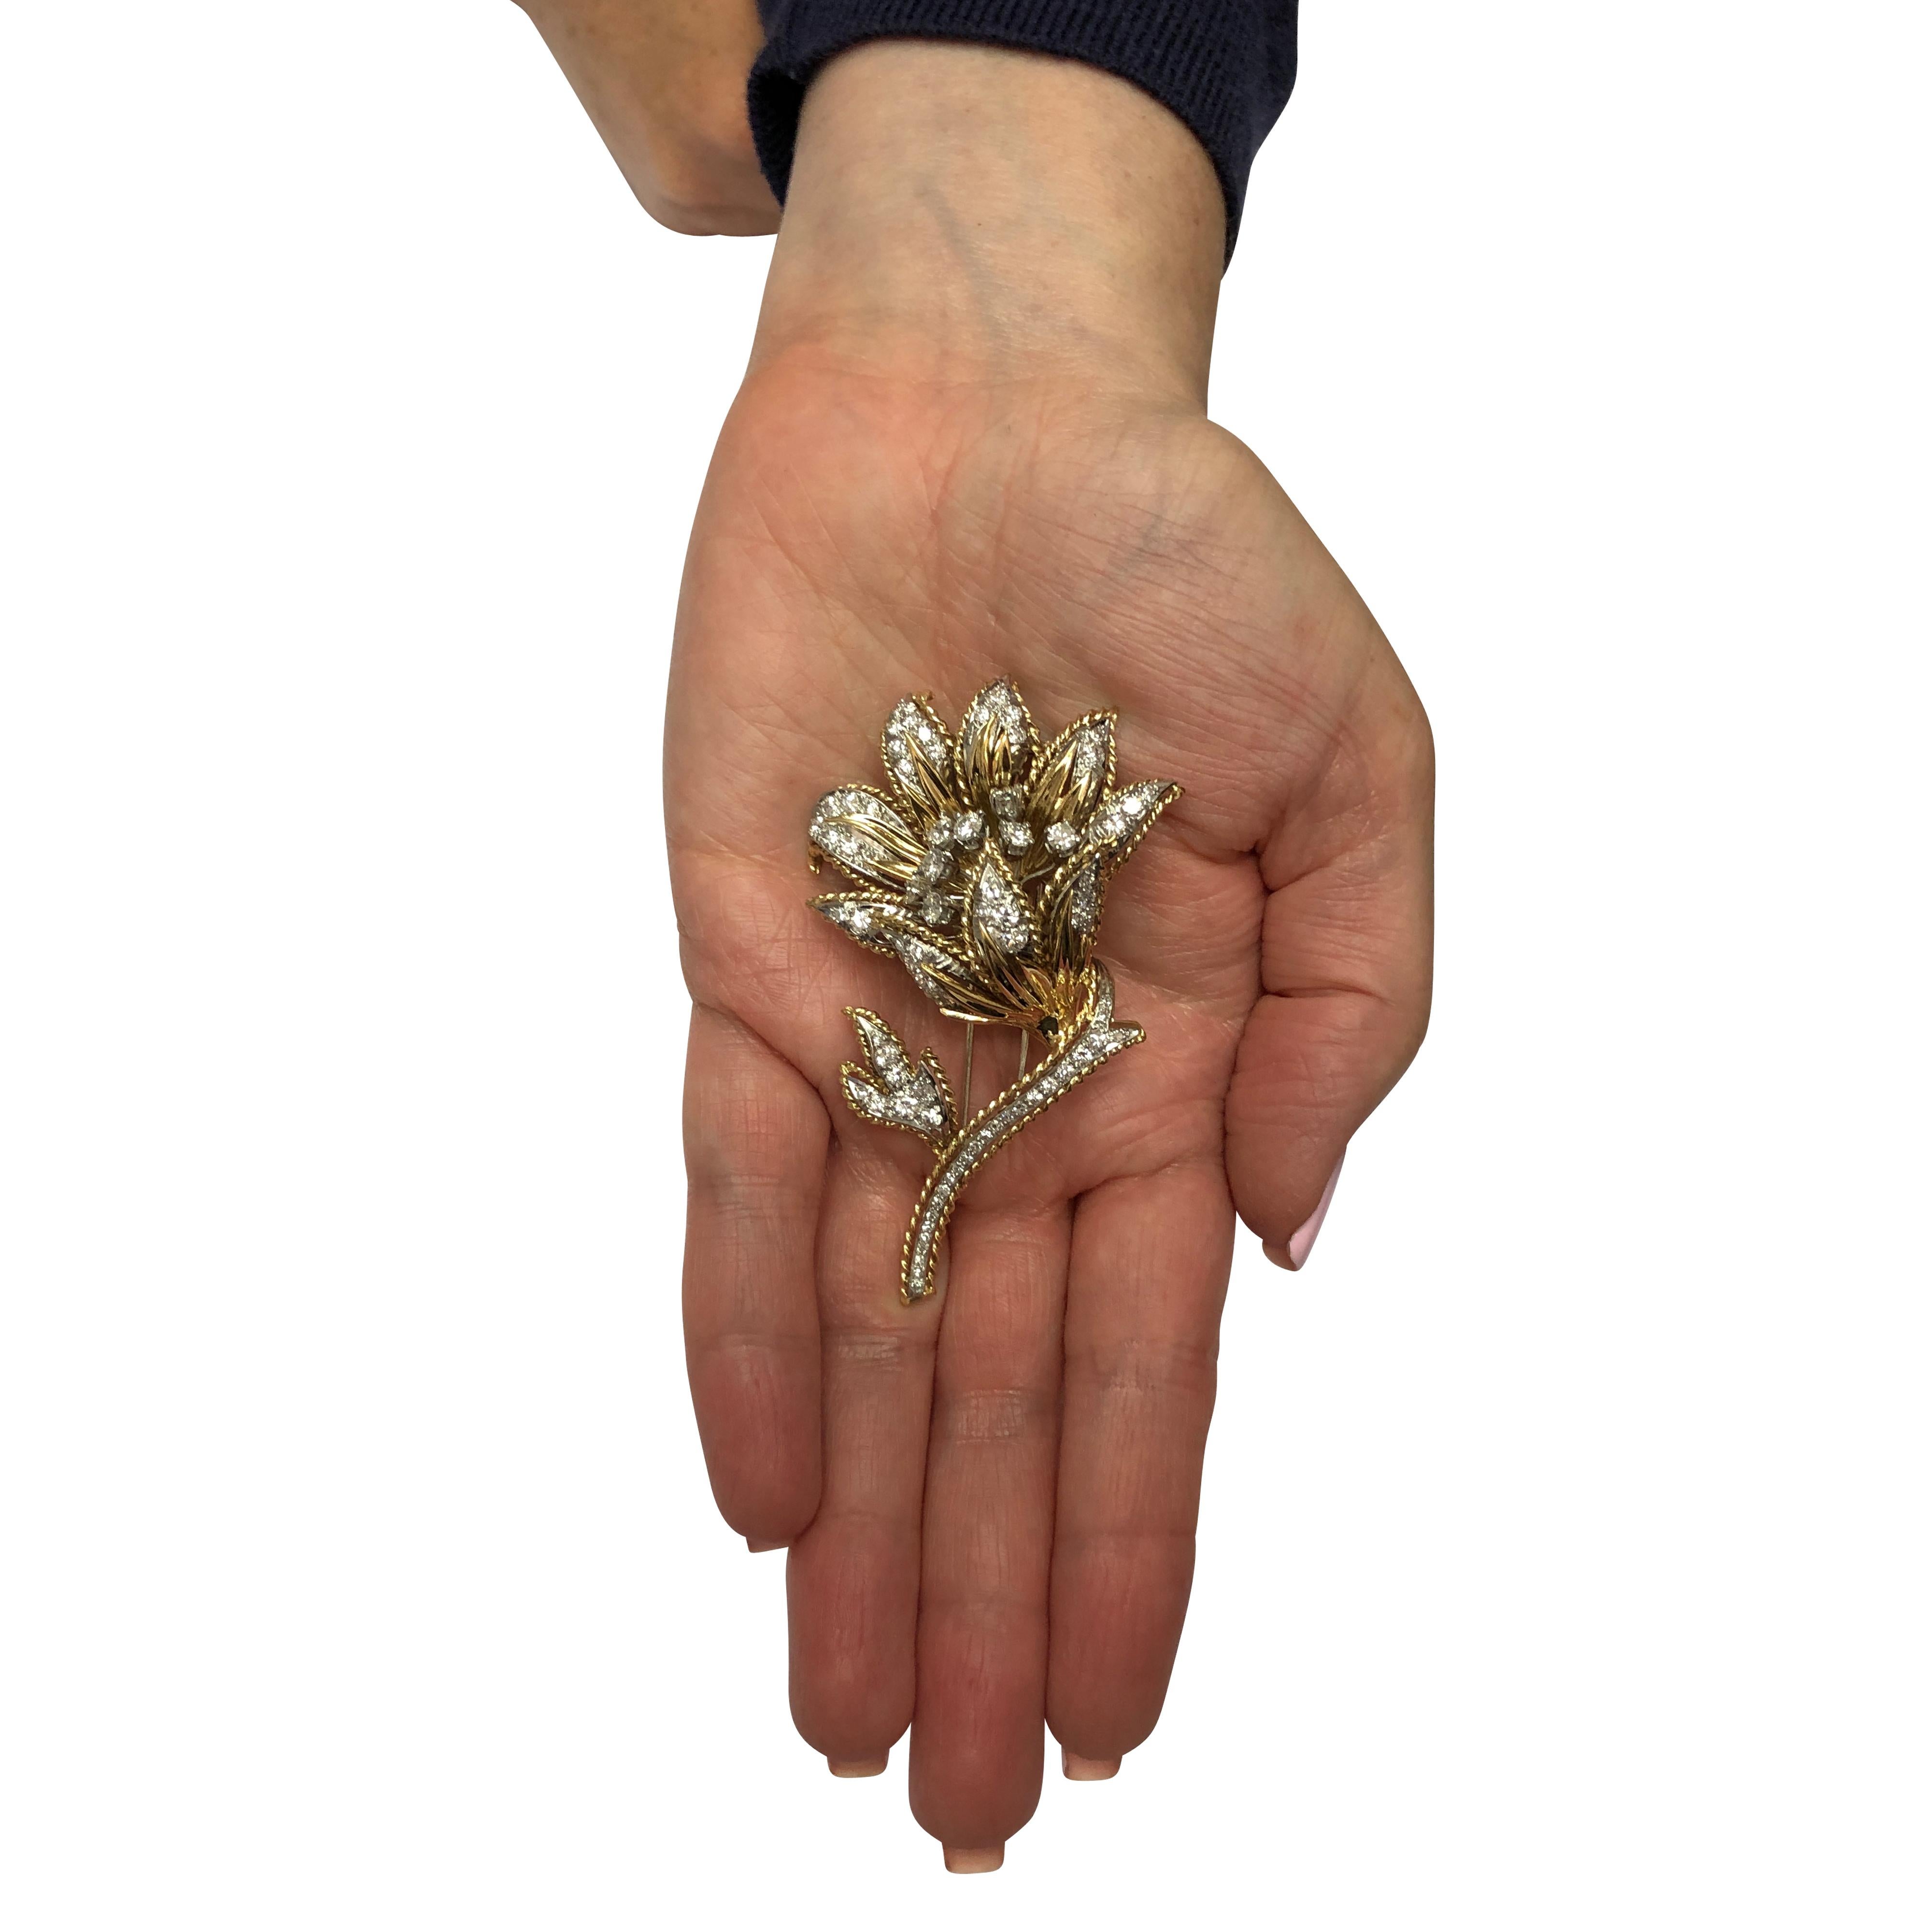 Beautiful brooch pin crafted in 18 karat yellow gold and platinum showcasing 80 round brilliant and single cut diamonds weighing 3.75 carats total, F color, VS clarity set in a flower design, capturing the unparalleled beauty of nature. This